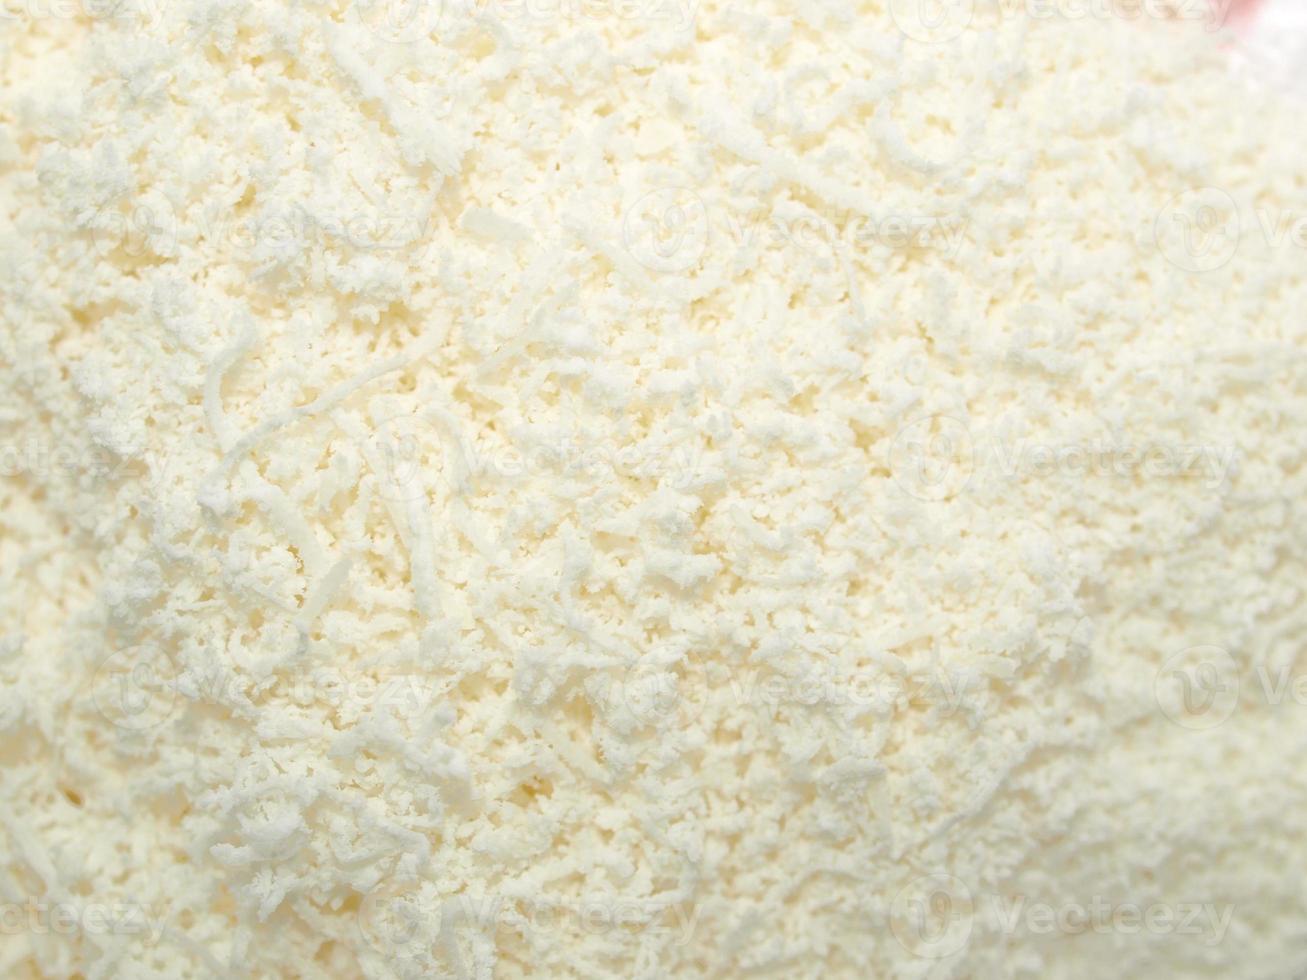 Parmesan cheese background photo